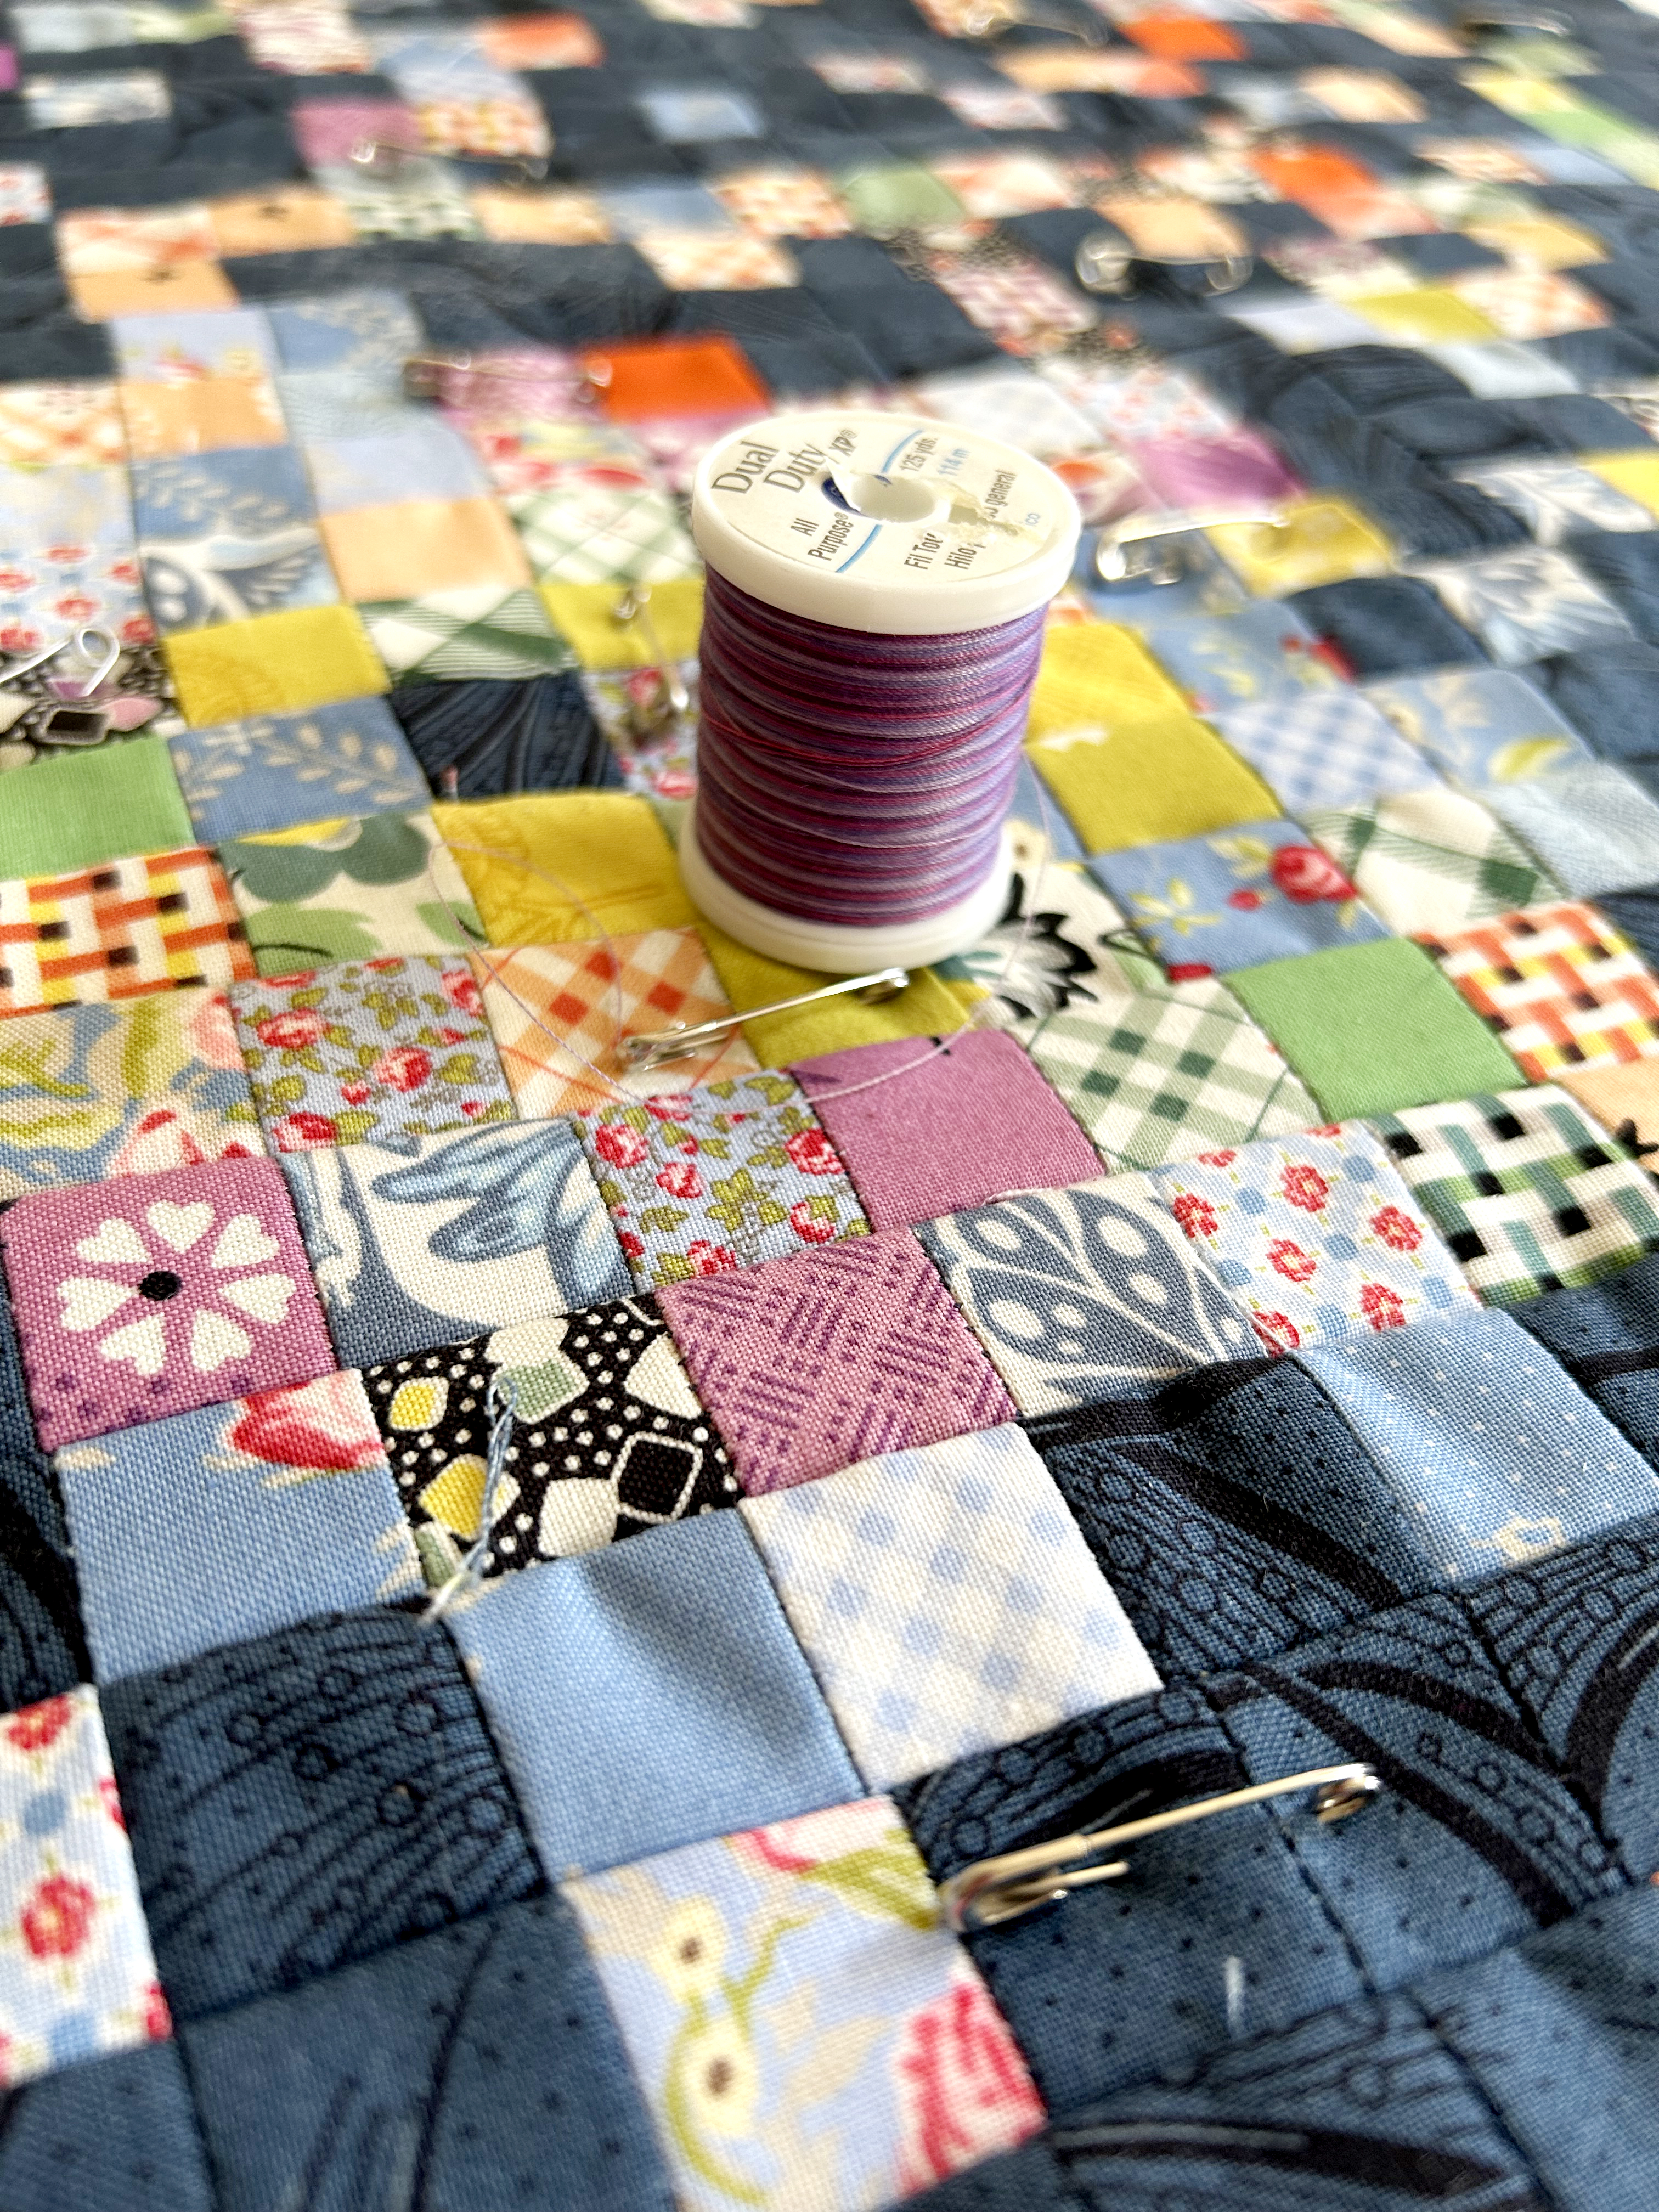 A multicolored quilt made up of small squares has been pinned with safety pins, and a pink-purple spool of thread sits on top of the quilt.